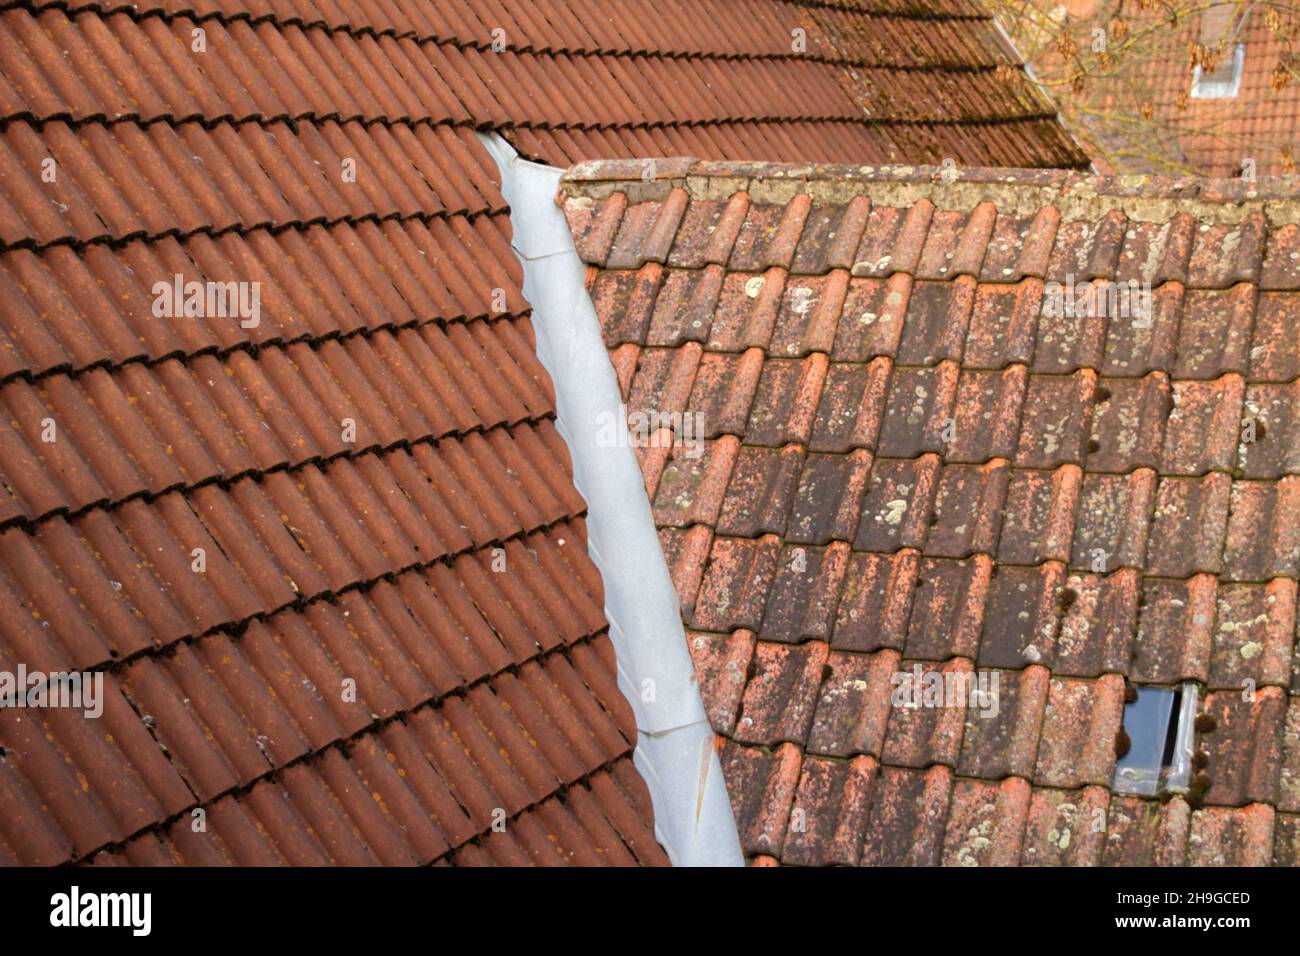 Close-up shot of a roof covered with red tiles during the day Stock Photo